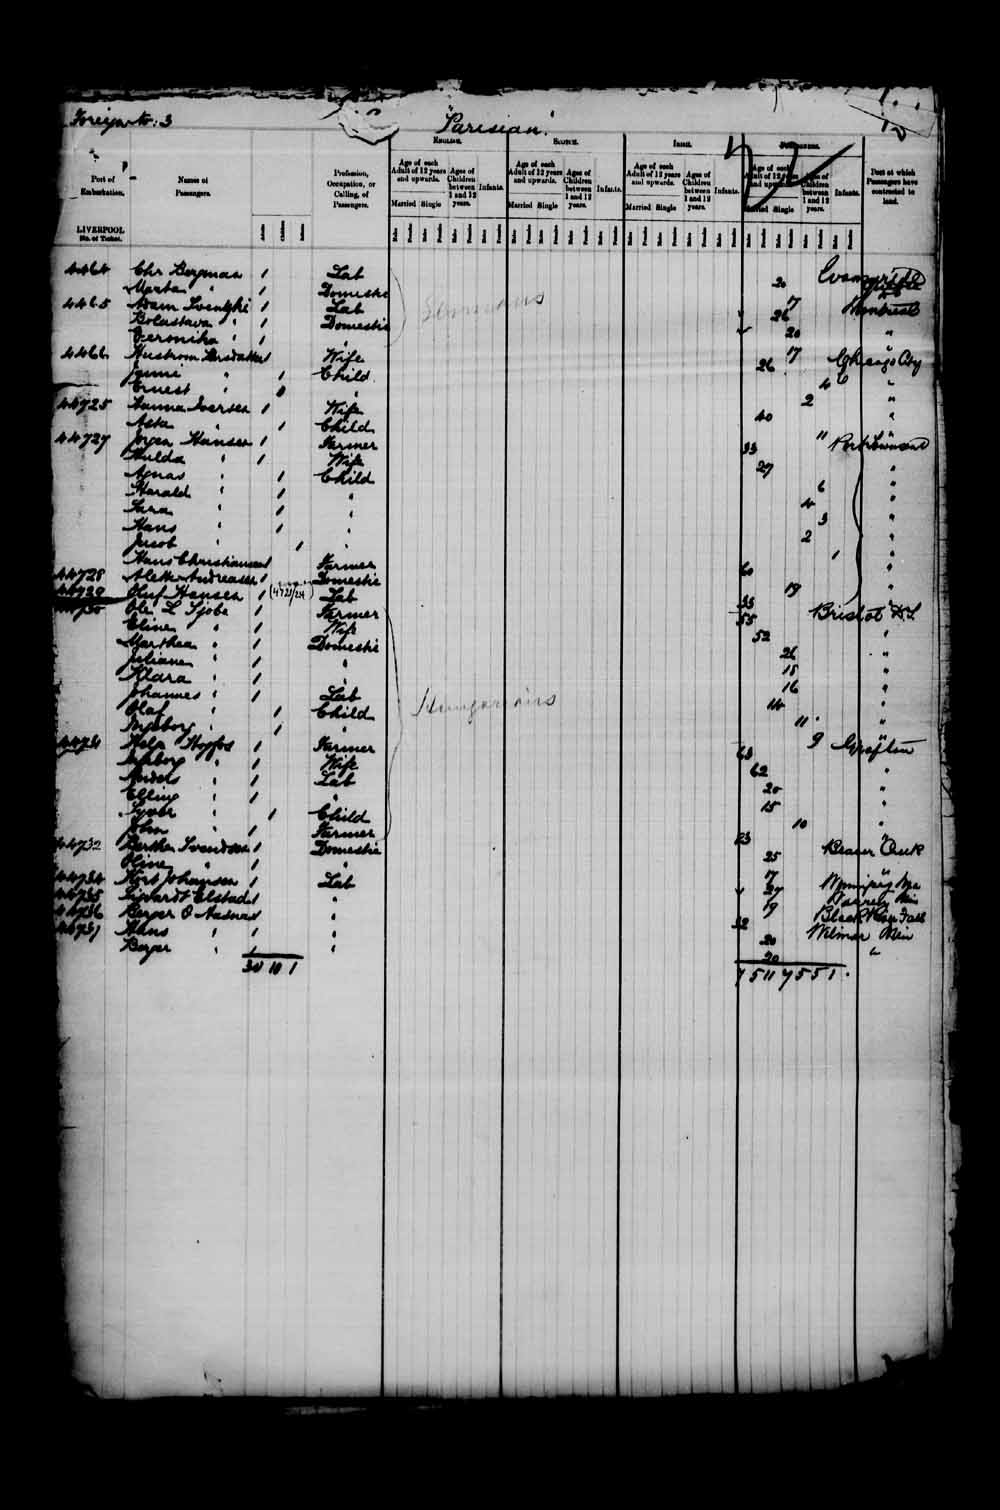 Digitized page of Passenger Lists for Image No.: e003549668